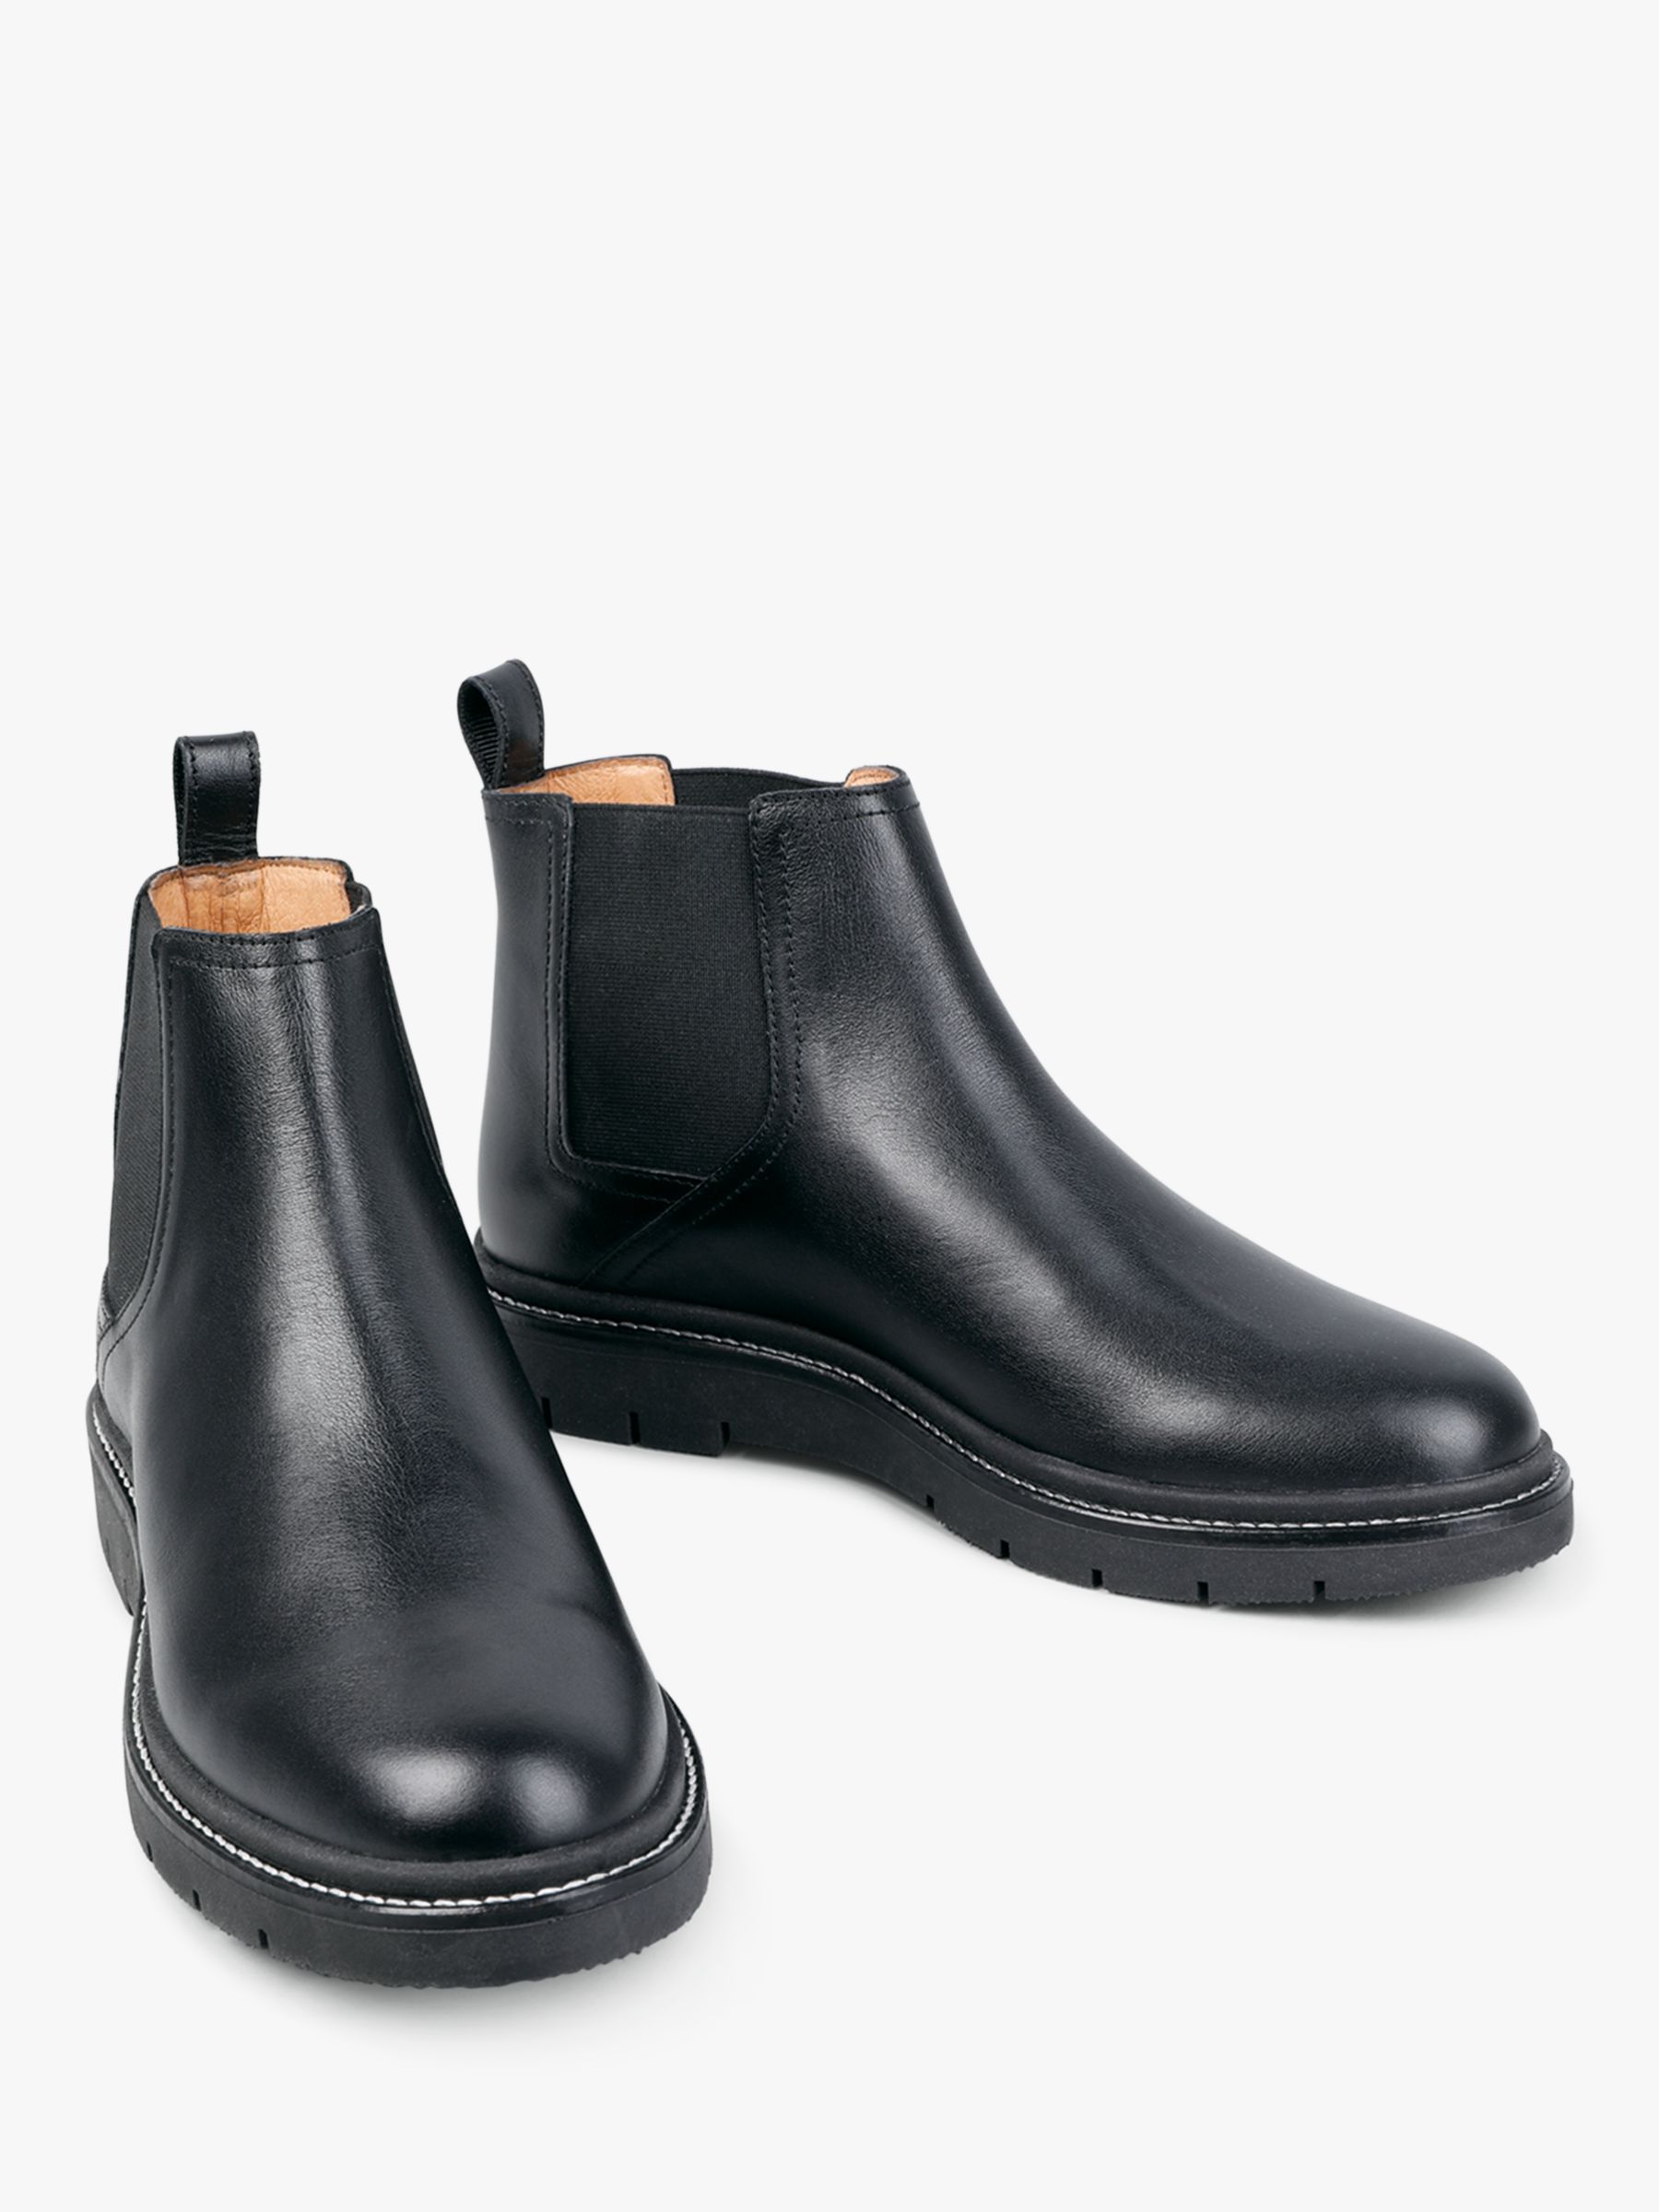 next black leather boots